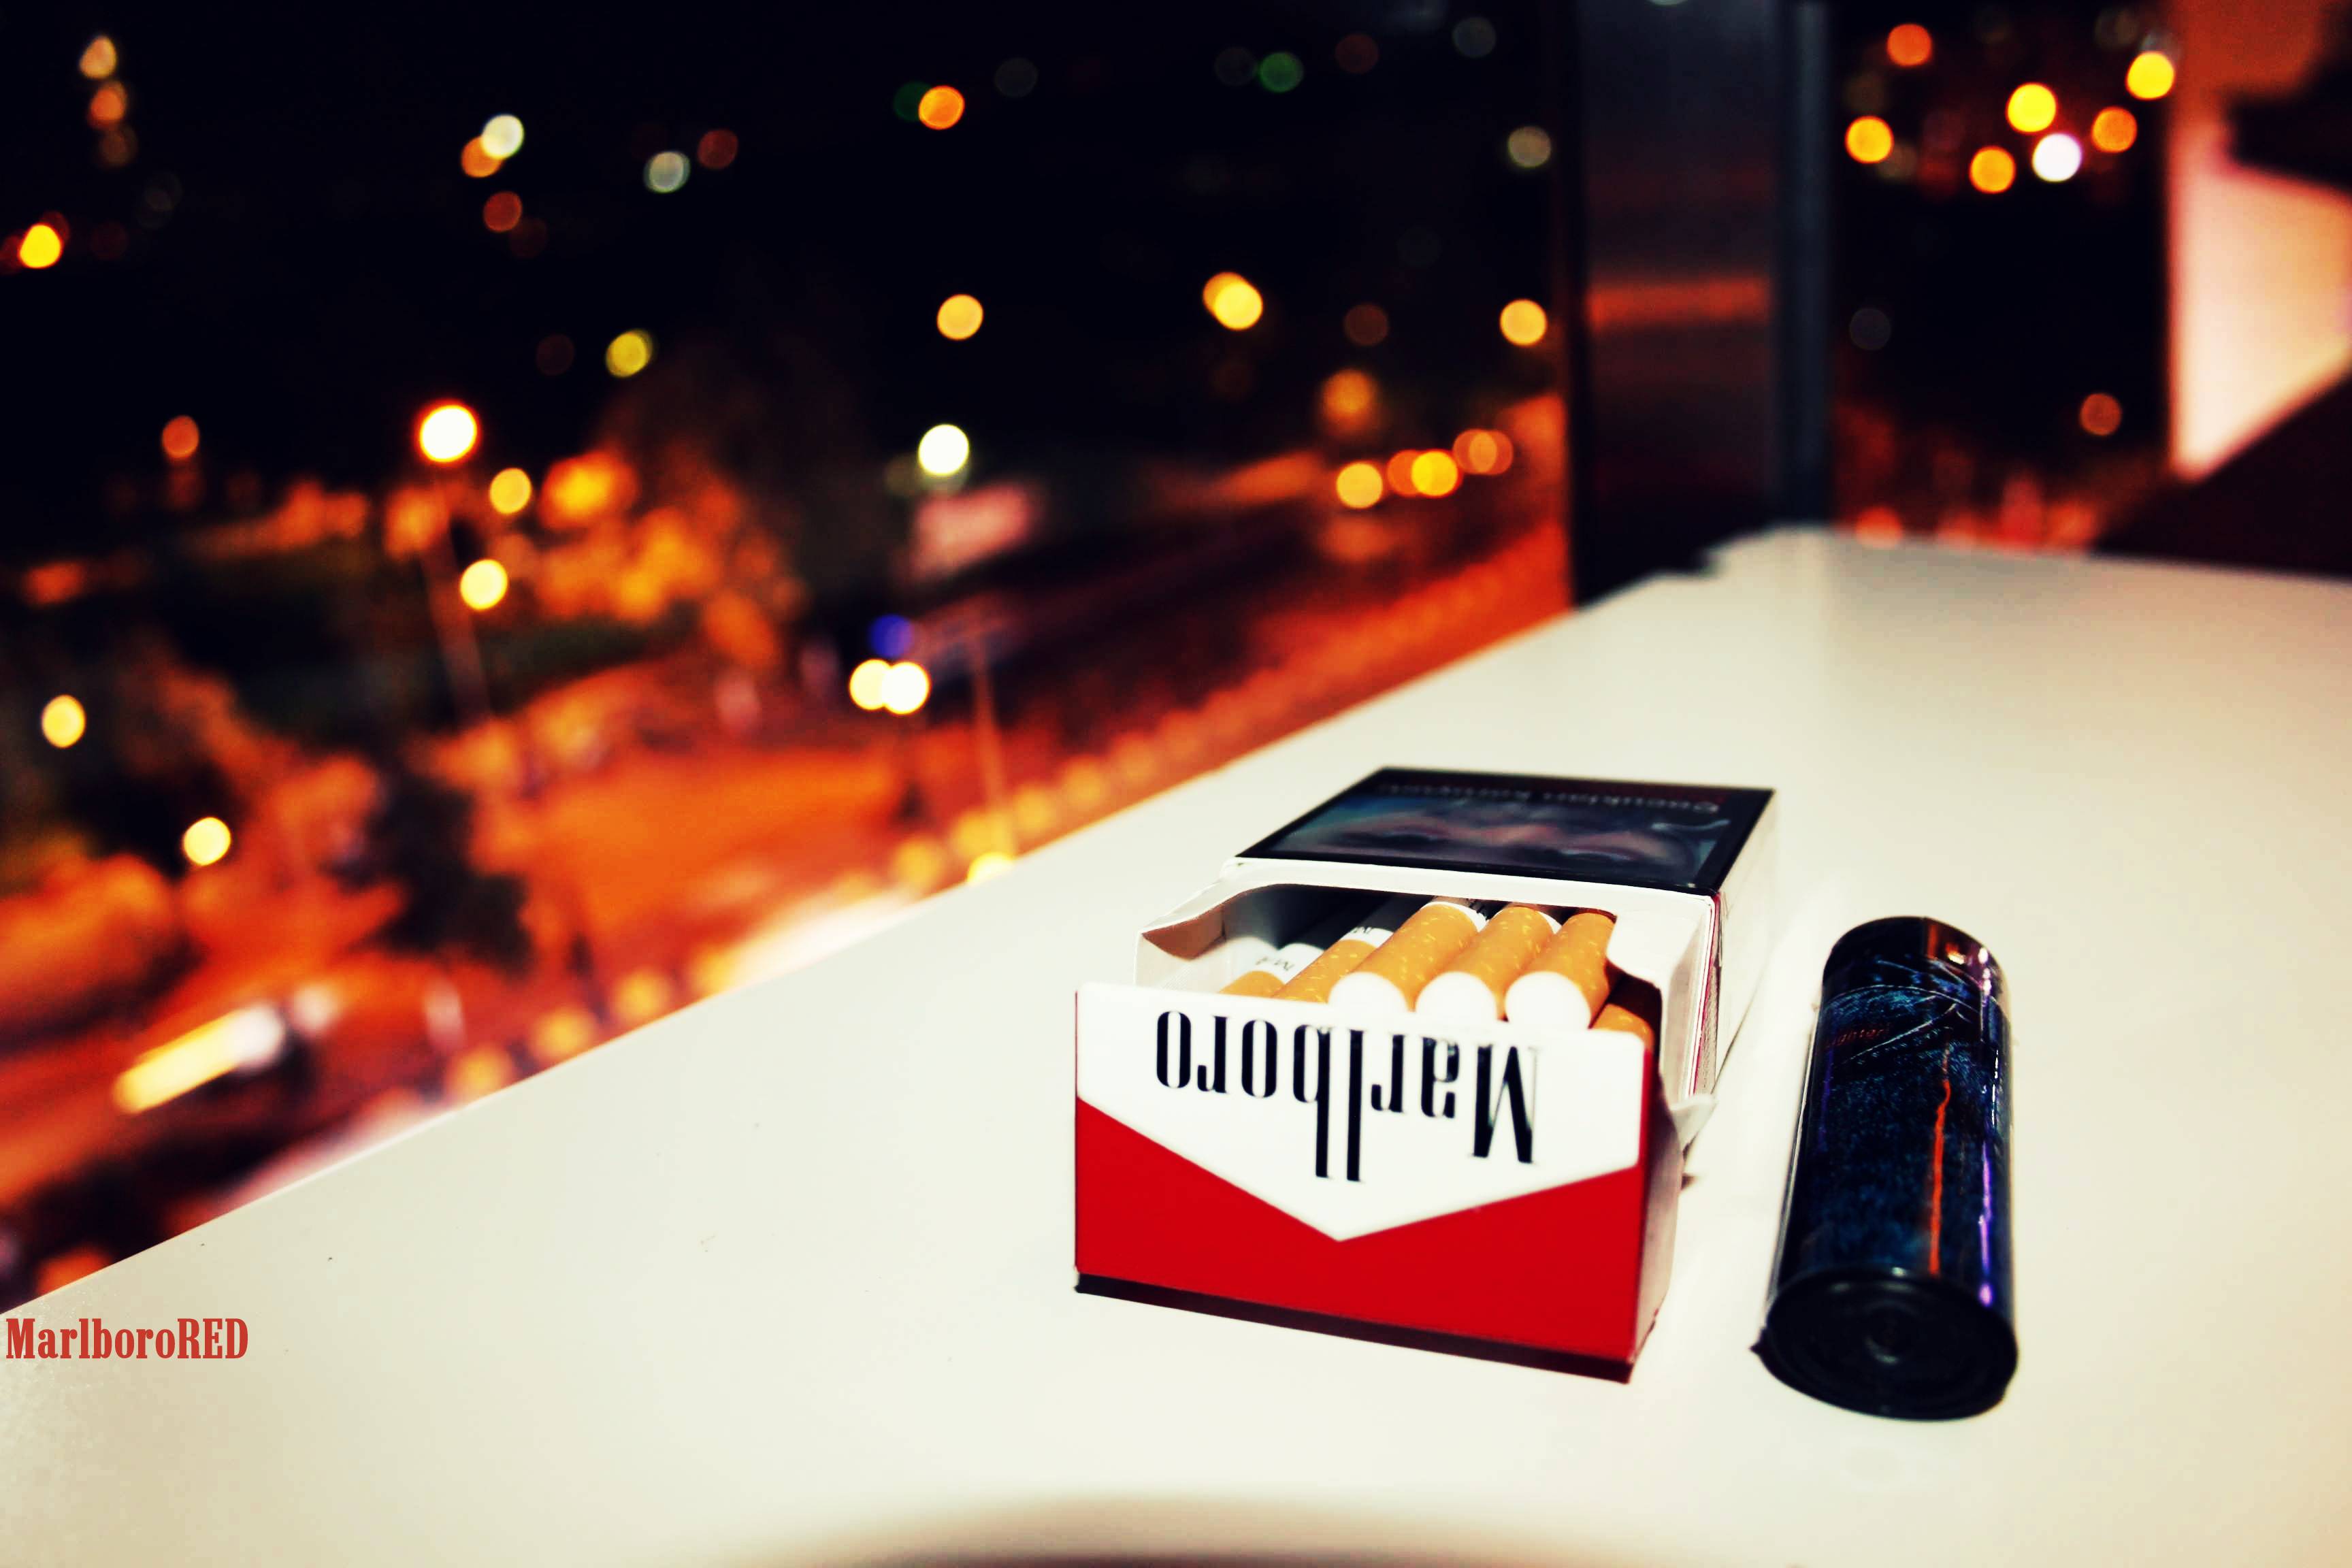 MARLBORO wallpaper by therareindian  Download on ZEDGE  6d69